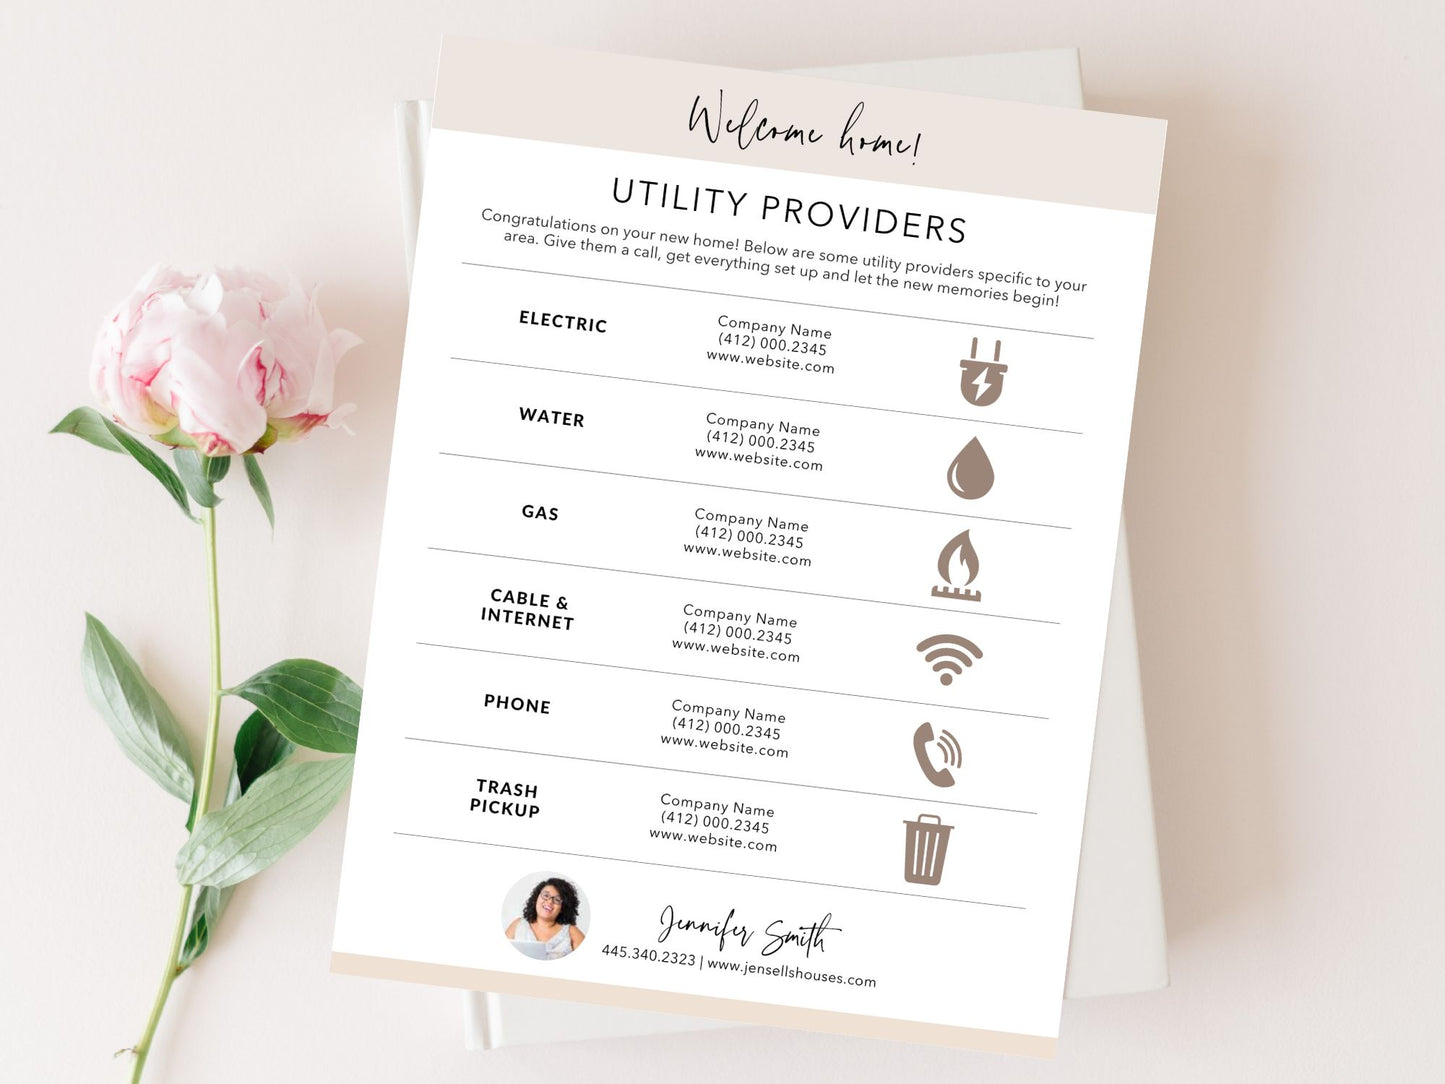 Real Estate Utility Provider List - Editable template for a seamless transition in connecting essential utilities in the real estate journey.